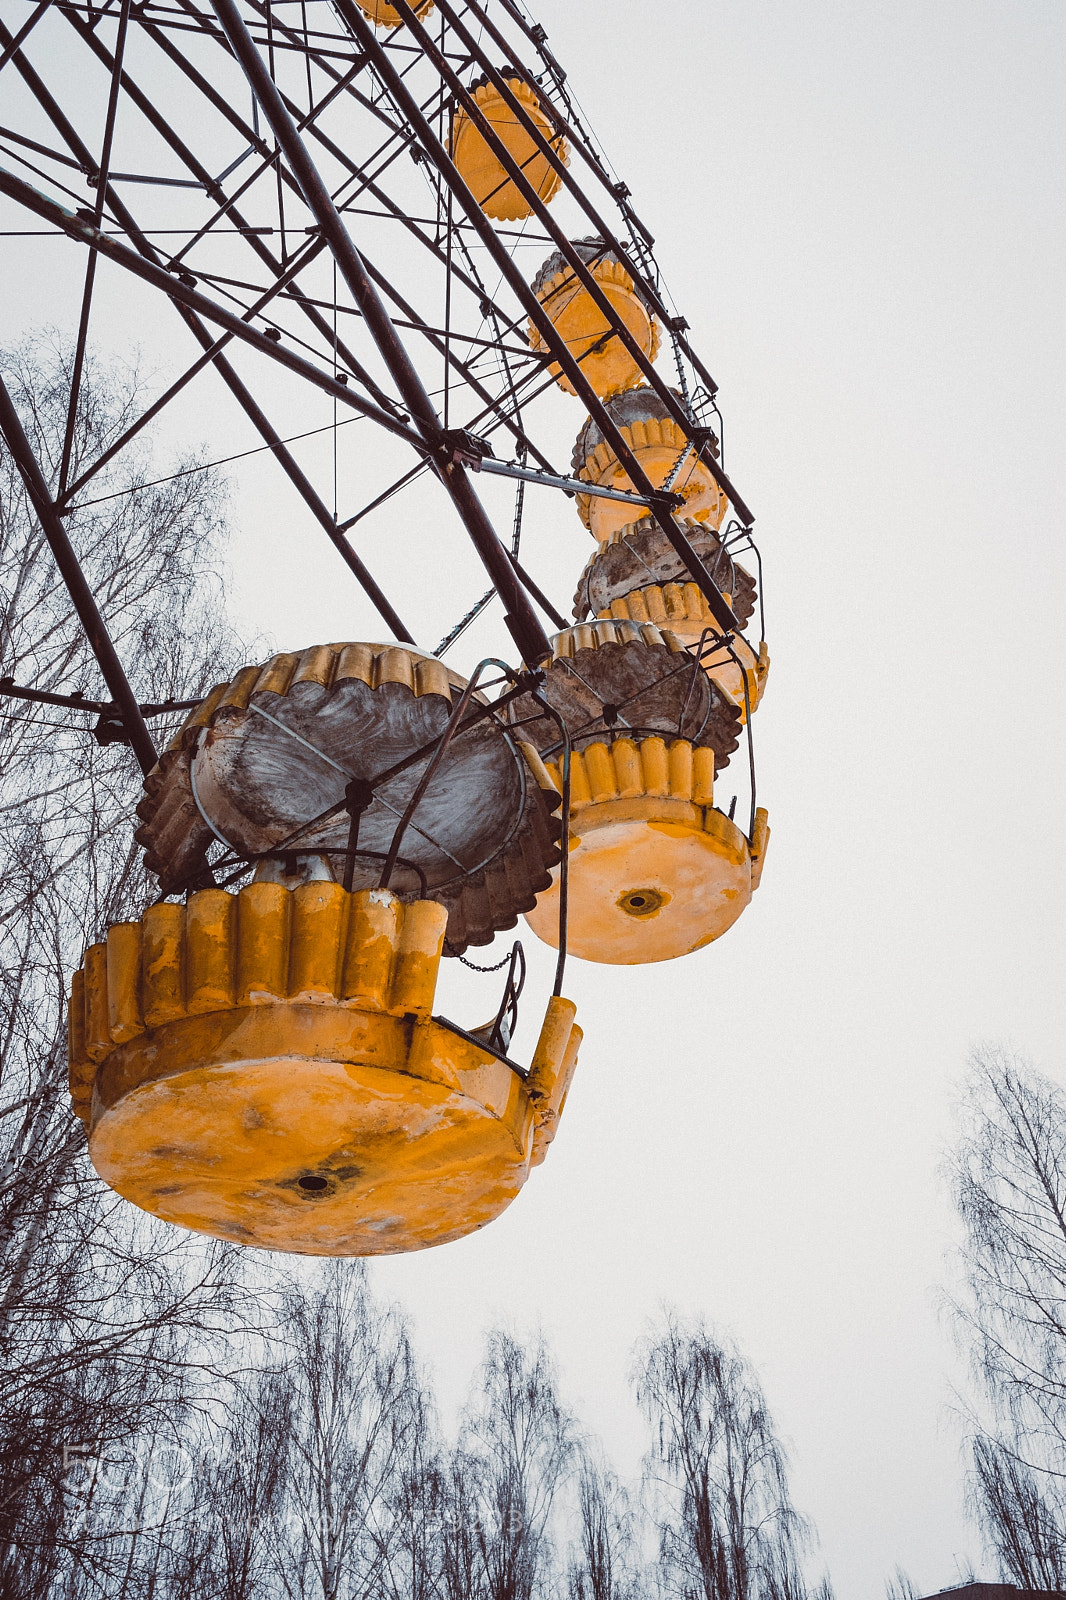 Sony a7 sample photo. Ferris wheel in prypjat photography